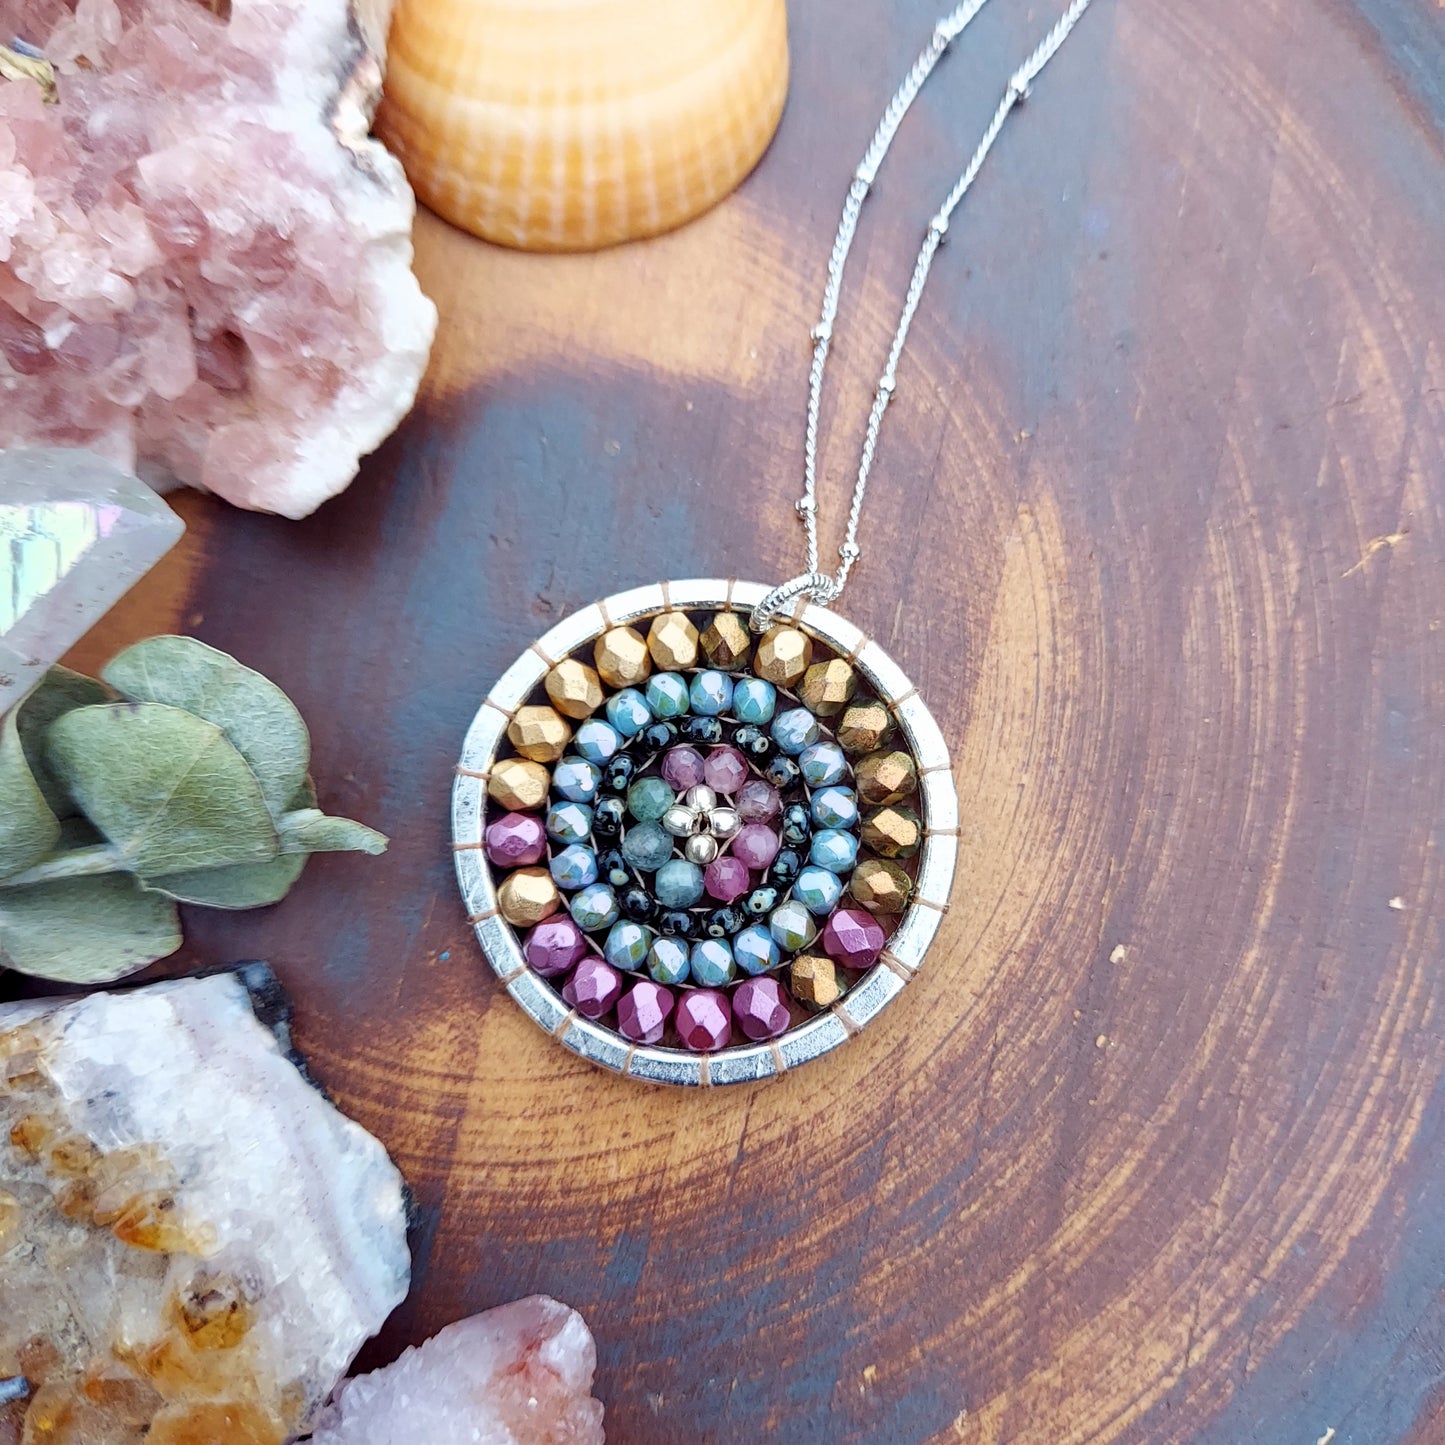 One of a Kind Sterling Silver Beaded Mandala Necklace